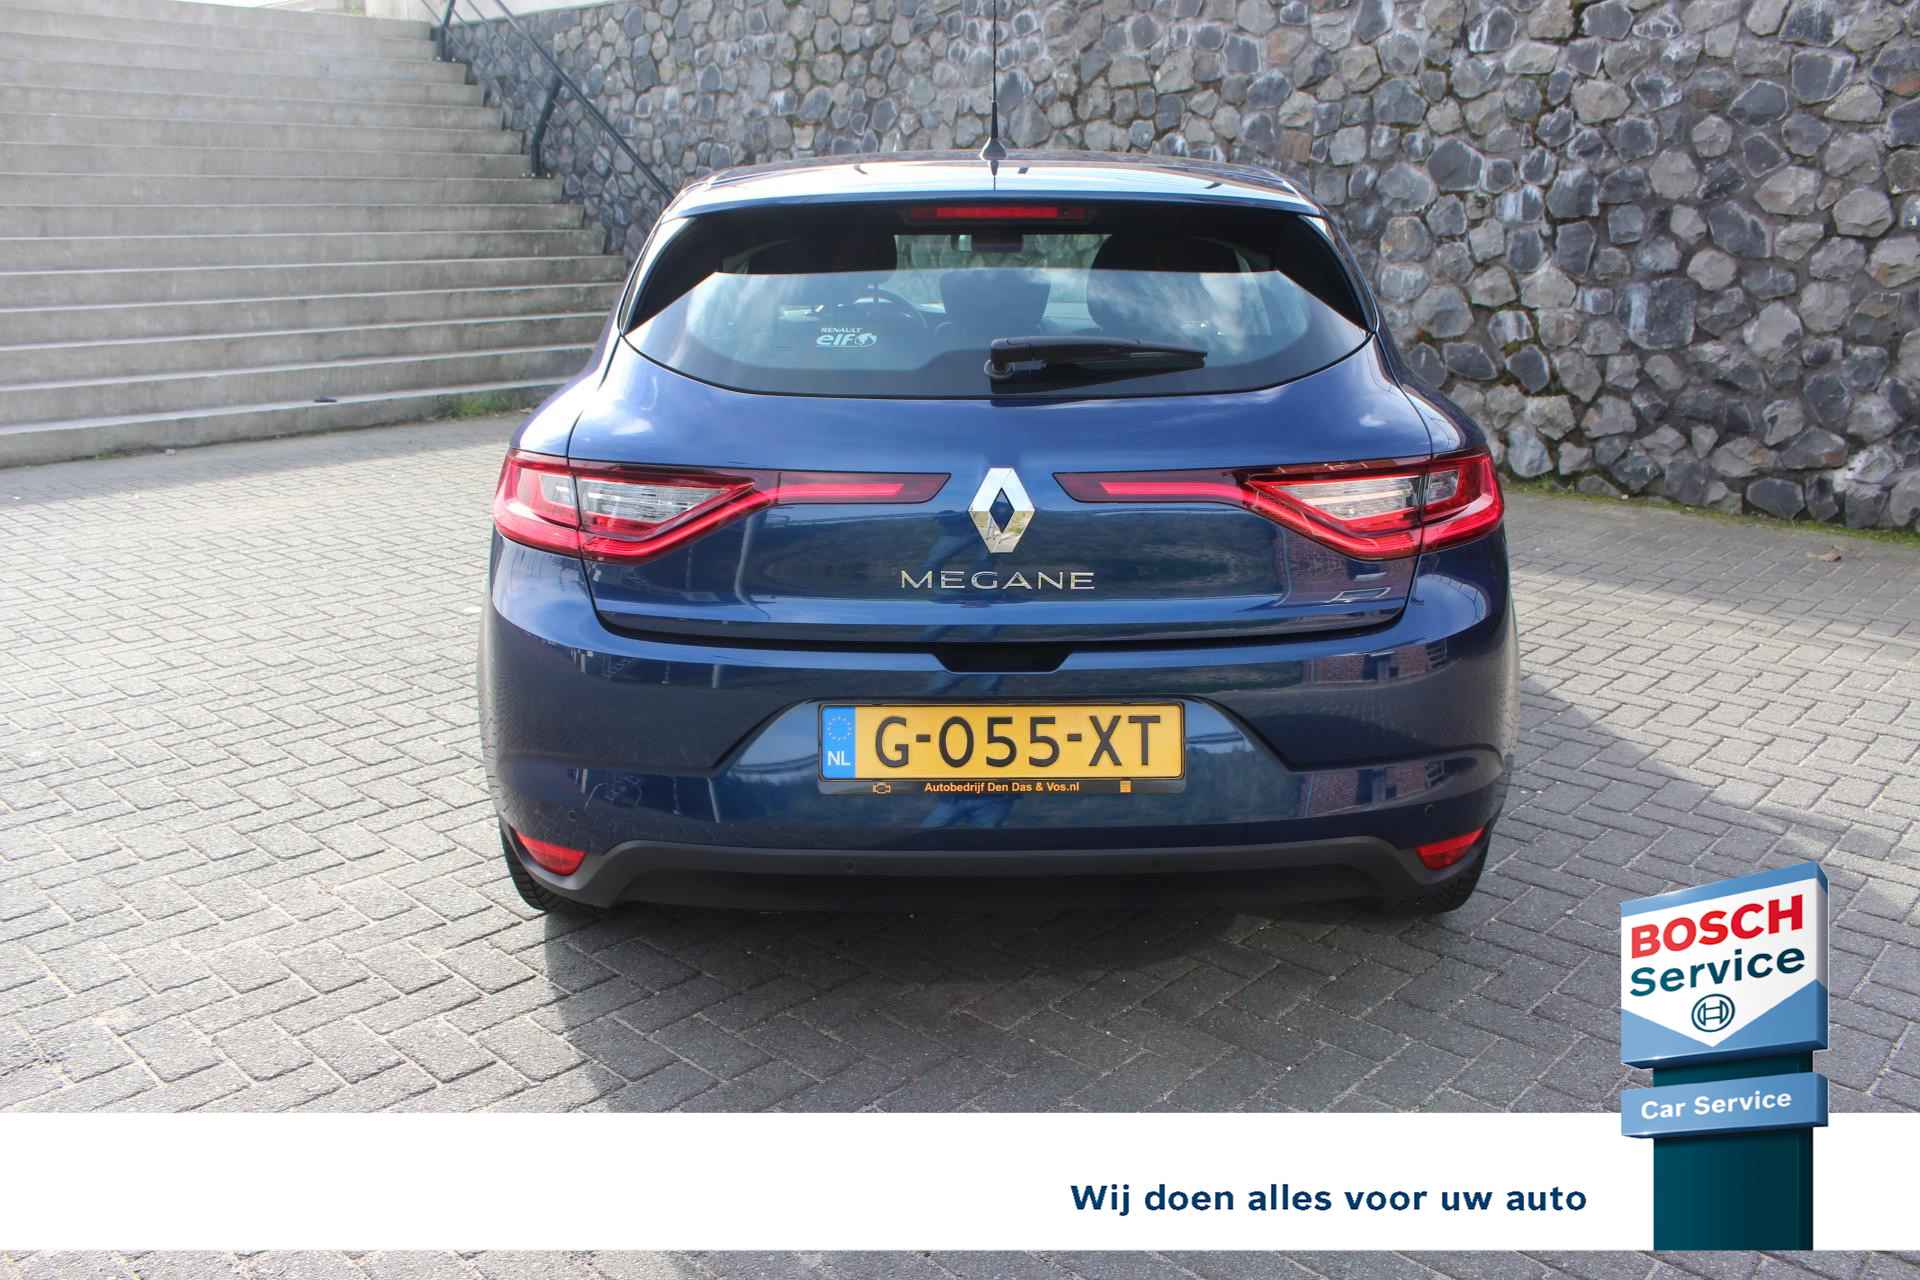 Renault Mégane 1.3 TCe Zen Dab+ audio Climate + cruise control Navi PDC achter Led verlichting voor + achter - 5/34